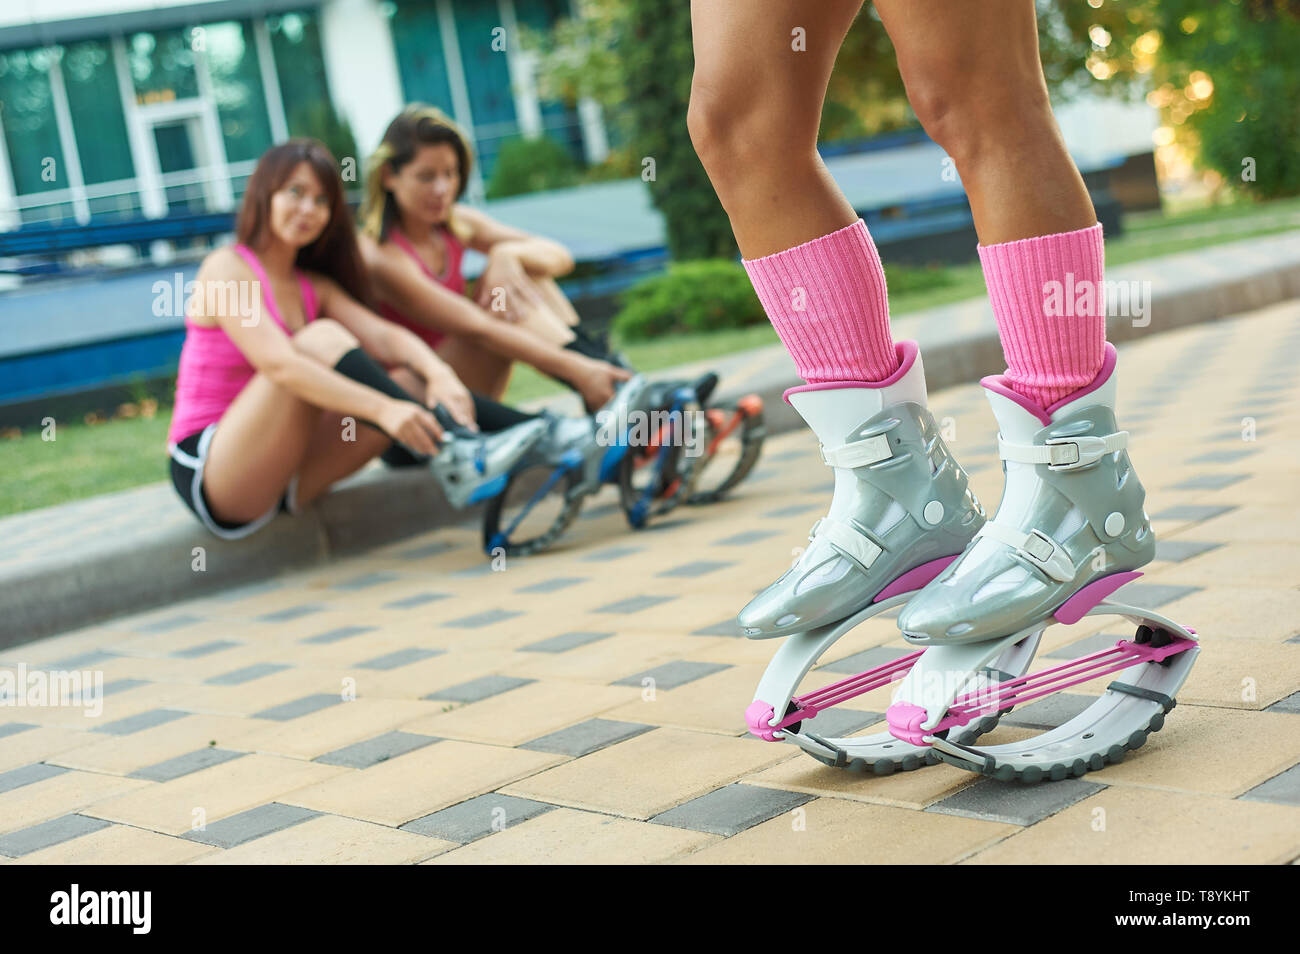 kangoo jumping fitness women team in boots. close up shot with blurred background. sport training concept Stock Photo